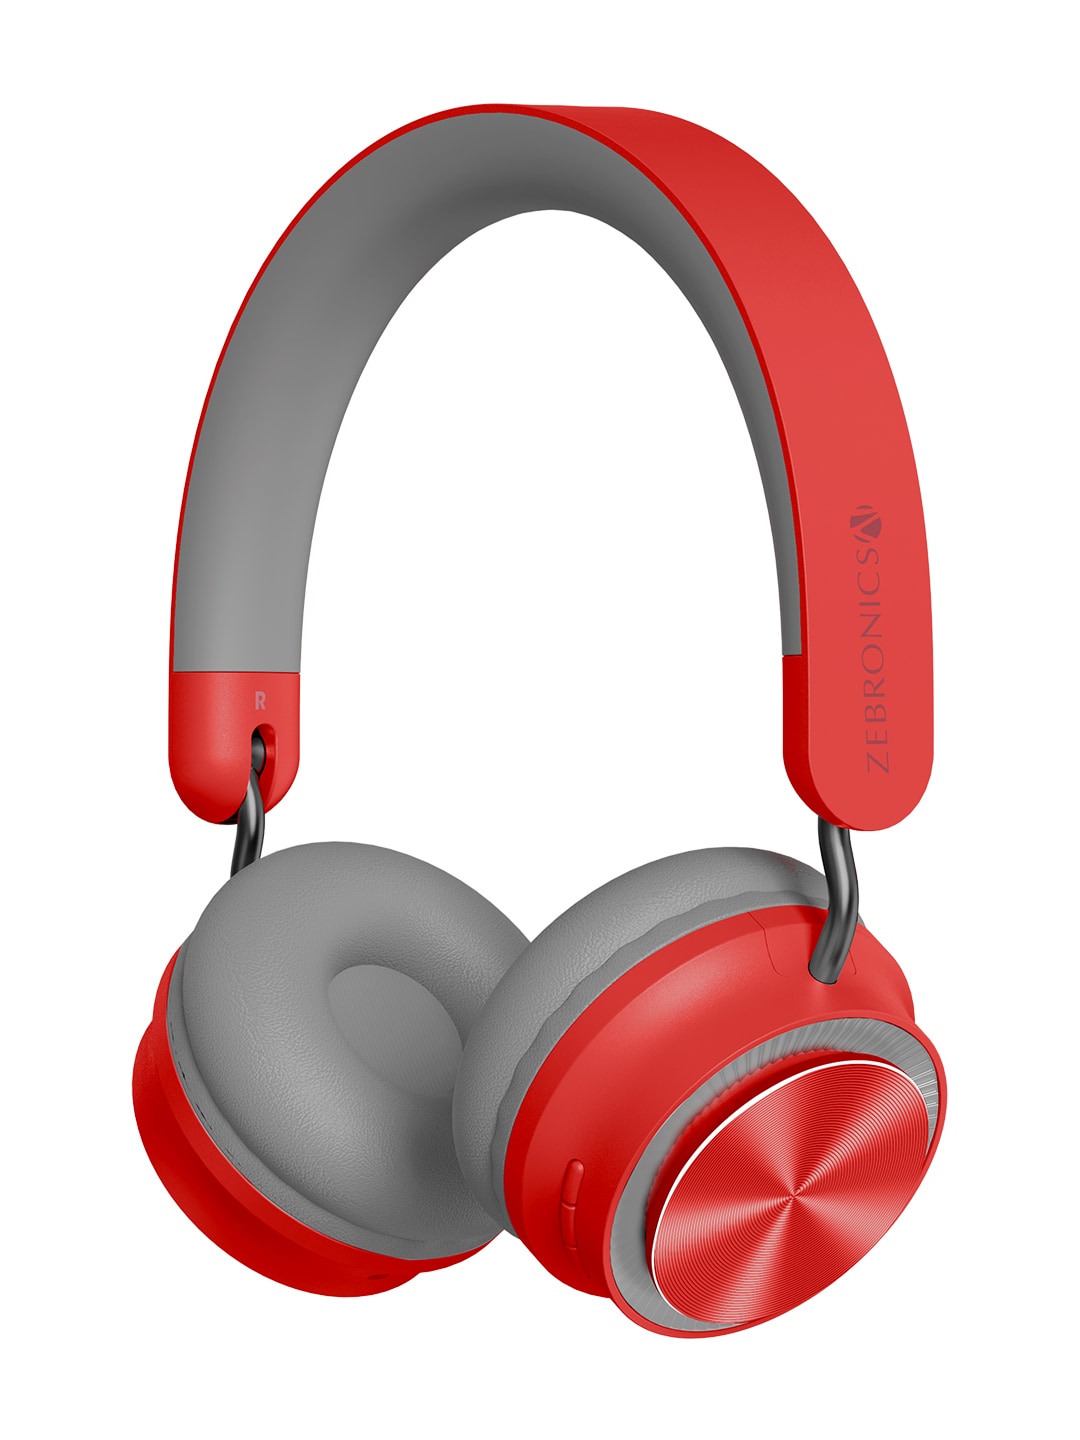 ZEBRONICS Zeb-Bang PRO Bluetooth v5.0 Headphone With 30H Backup - Red Price in India